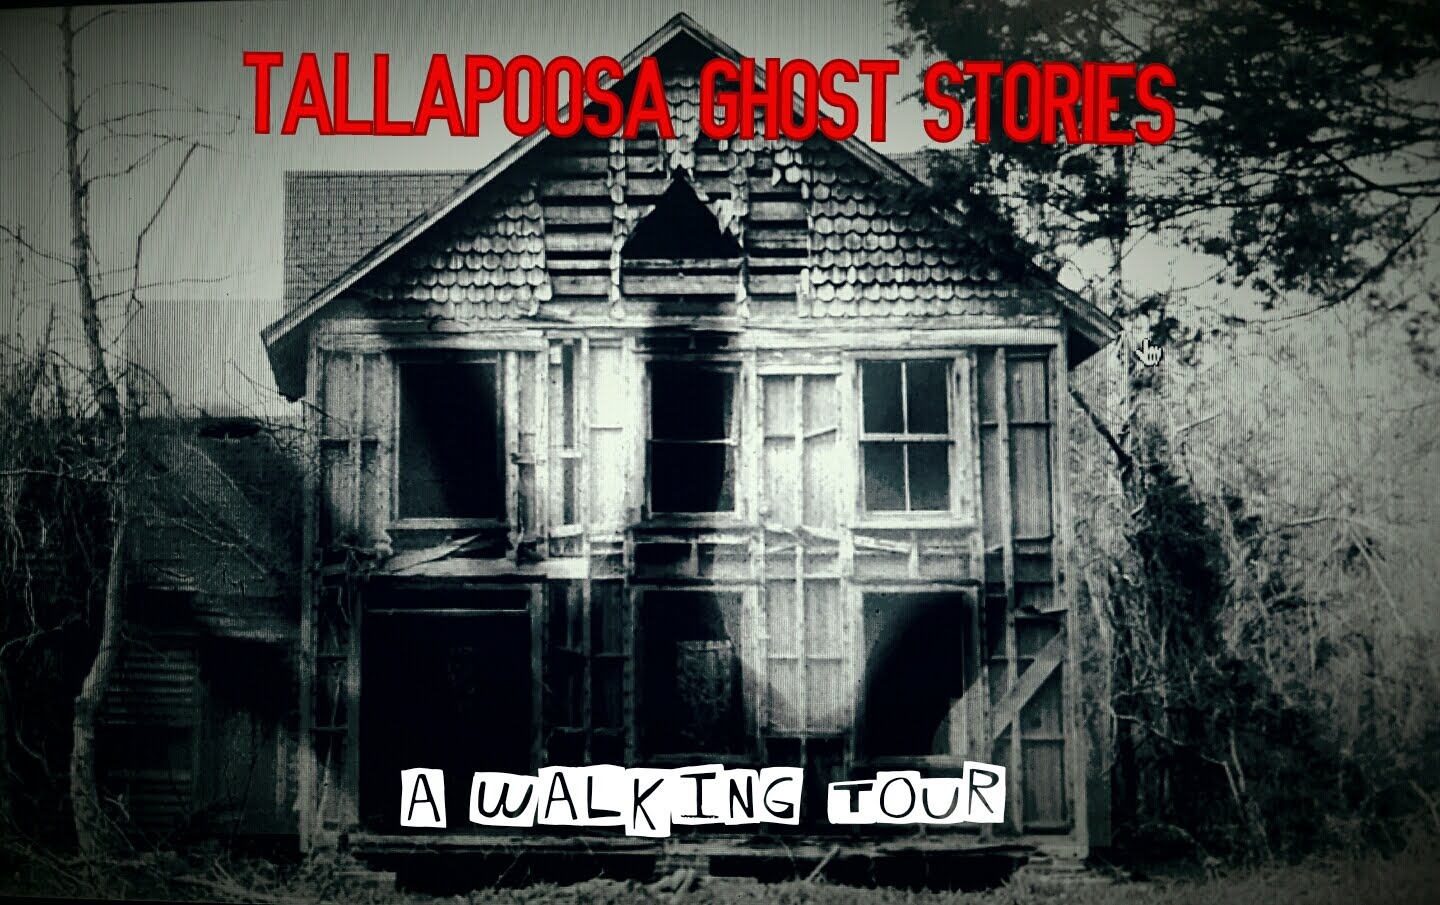 Tallapoosa Ghost Stories: A Walking Tour